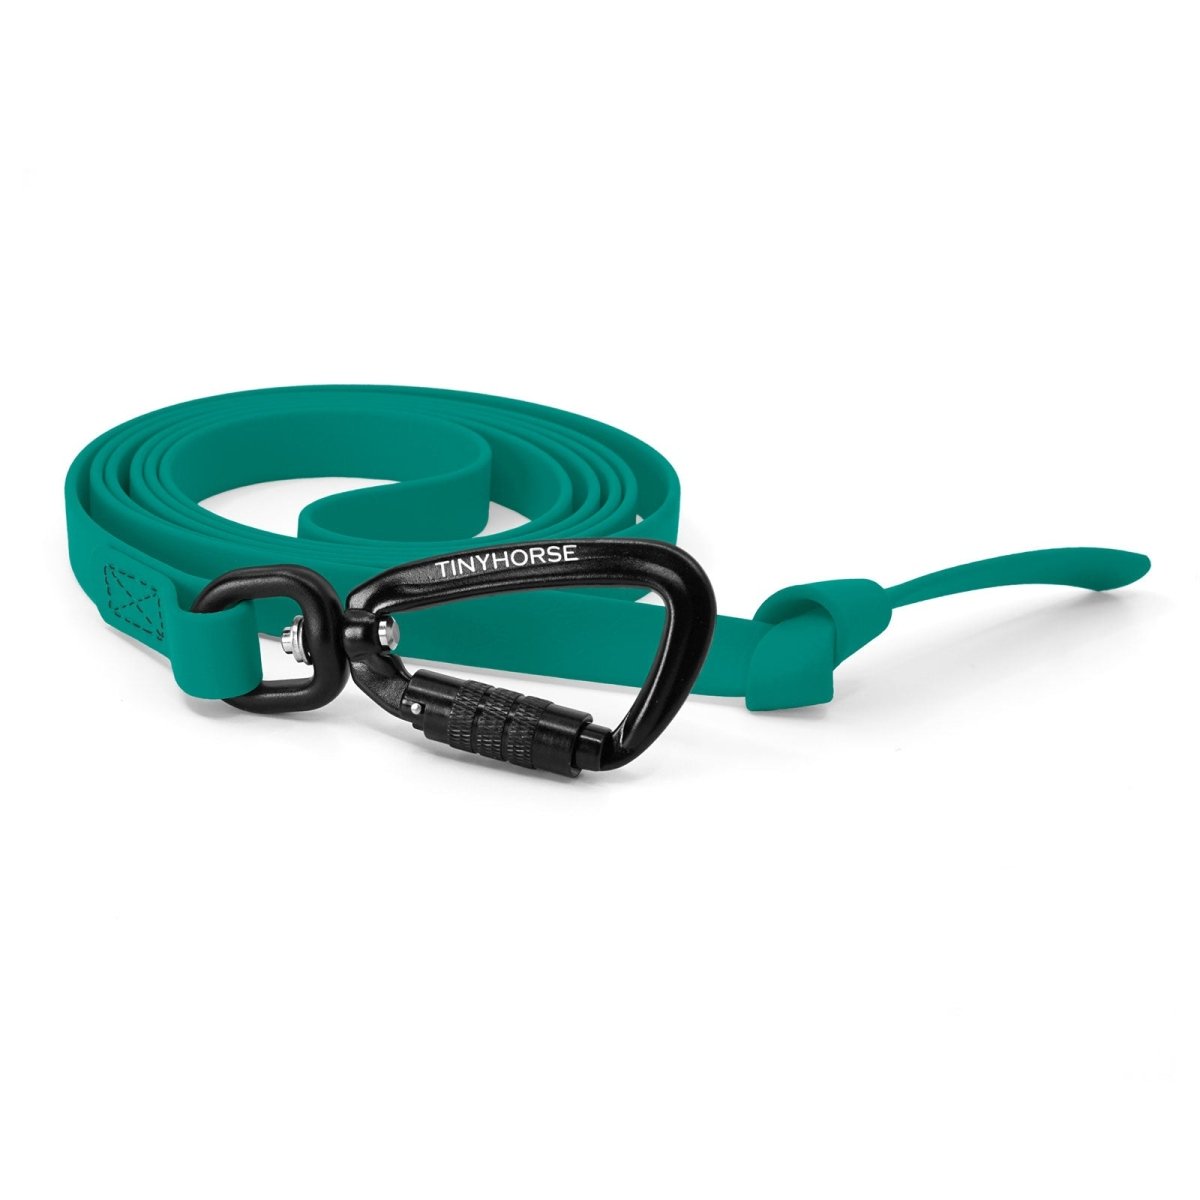 A teal-coloured Step Line made of BioThane and 2 auto-locking carabiners